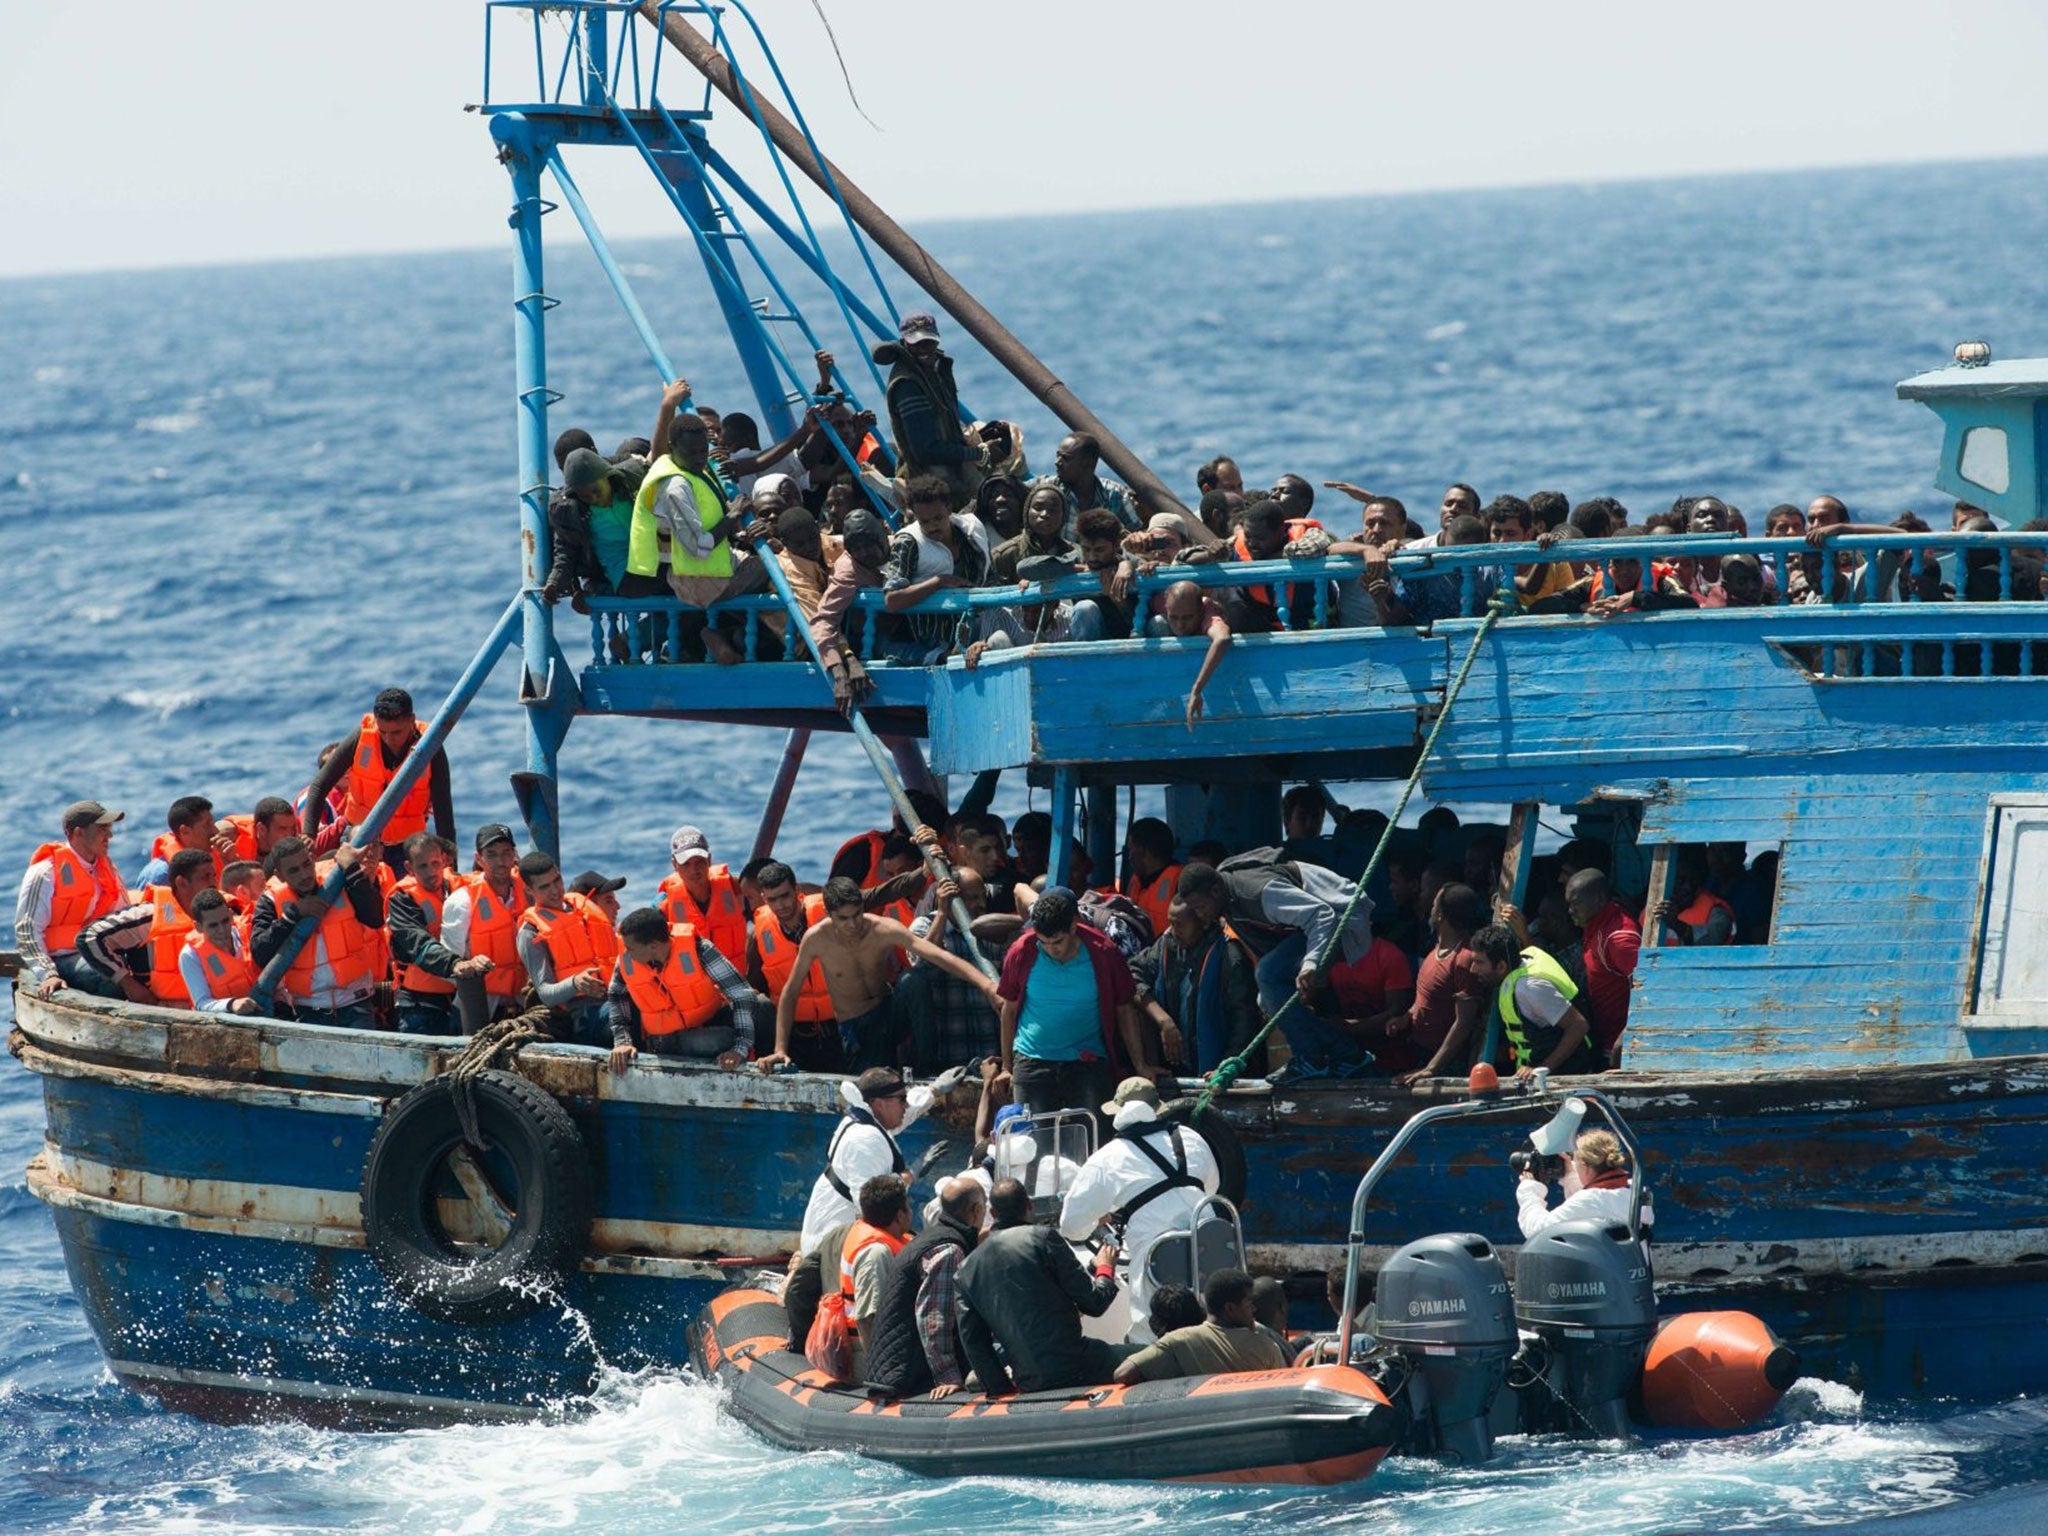 This handout picture released by the French NGO Medecins Sans FrontiËres (Doctors without borders - MSF) on August 27, 2015 shows migrants on a wooden boat during a rescue operation by MSF and the Swedish Coast Guards "Poseidon" in the Meditterranean sea